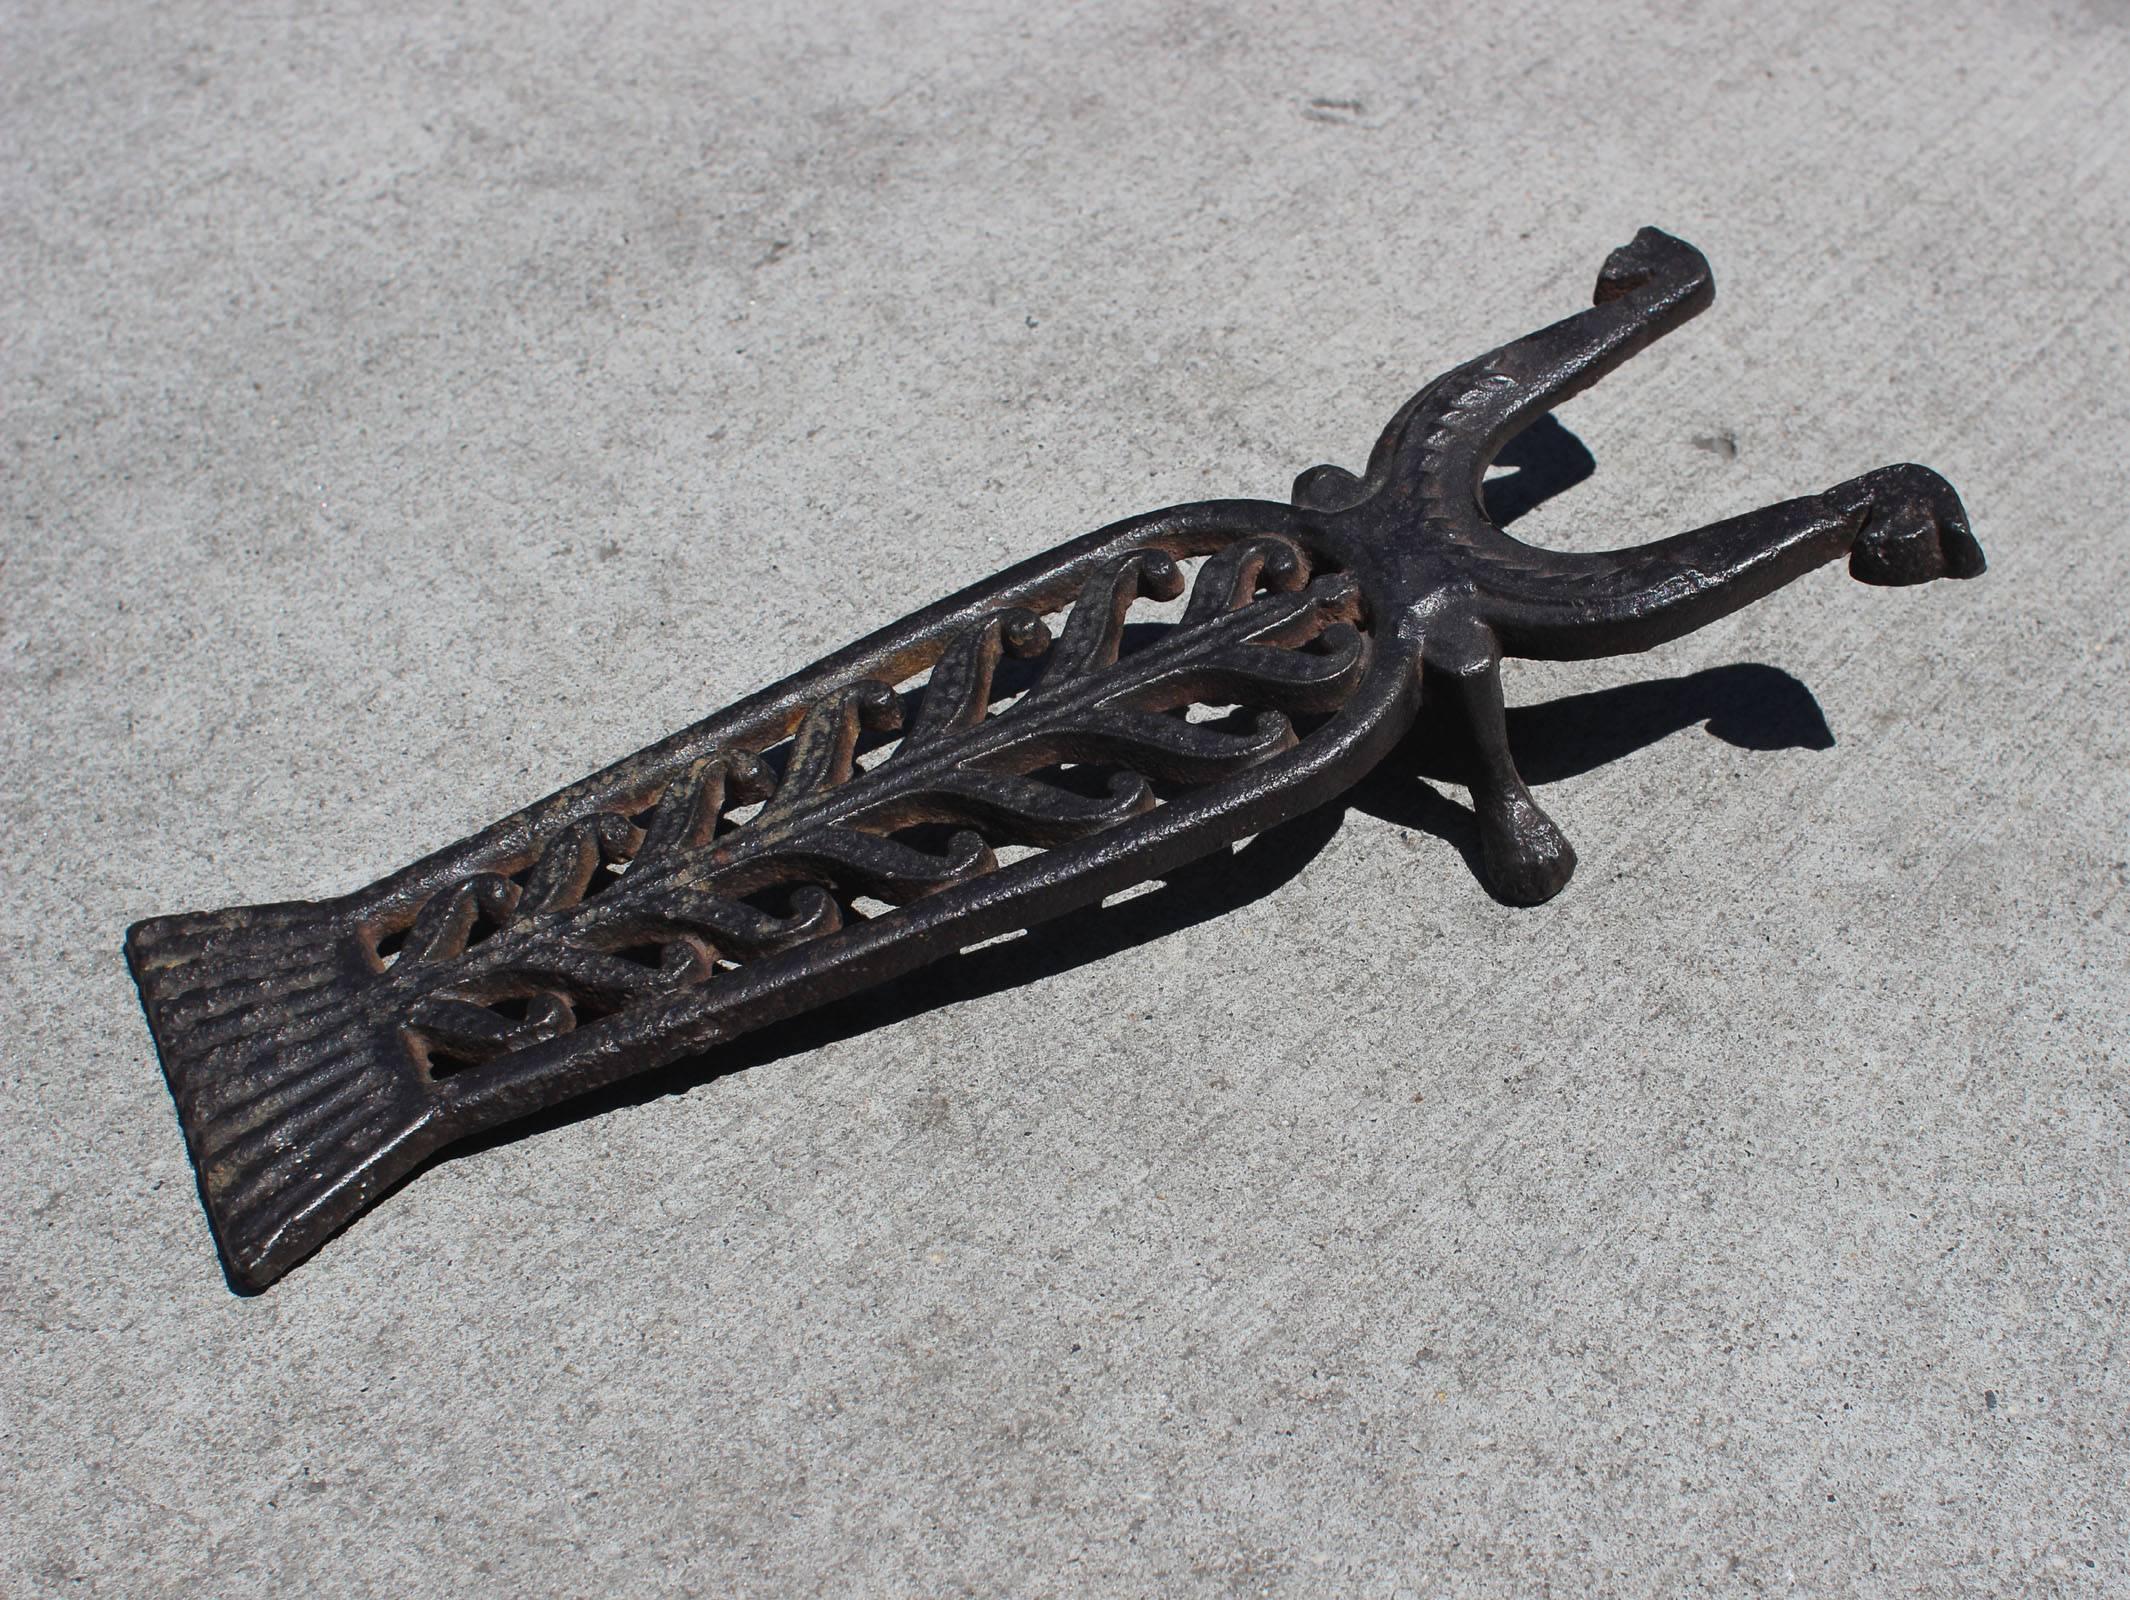 Handsome and heavy cast iron boot jack with nice detail and good lines, resembling an insect. Probably American, late 19th century. Nicely functional. Original black paint over iron.